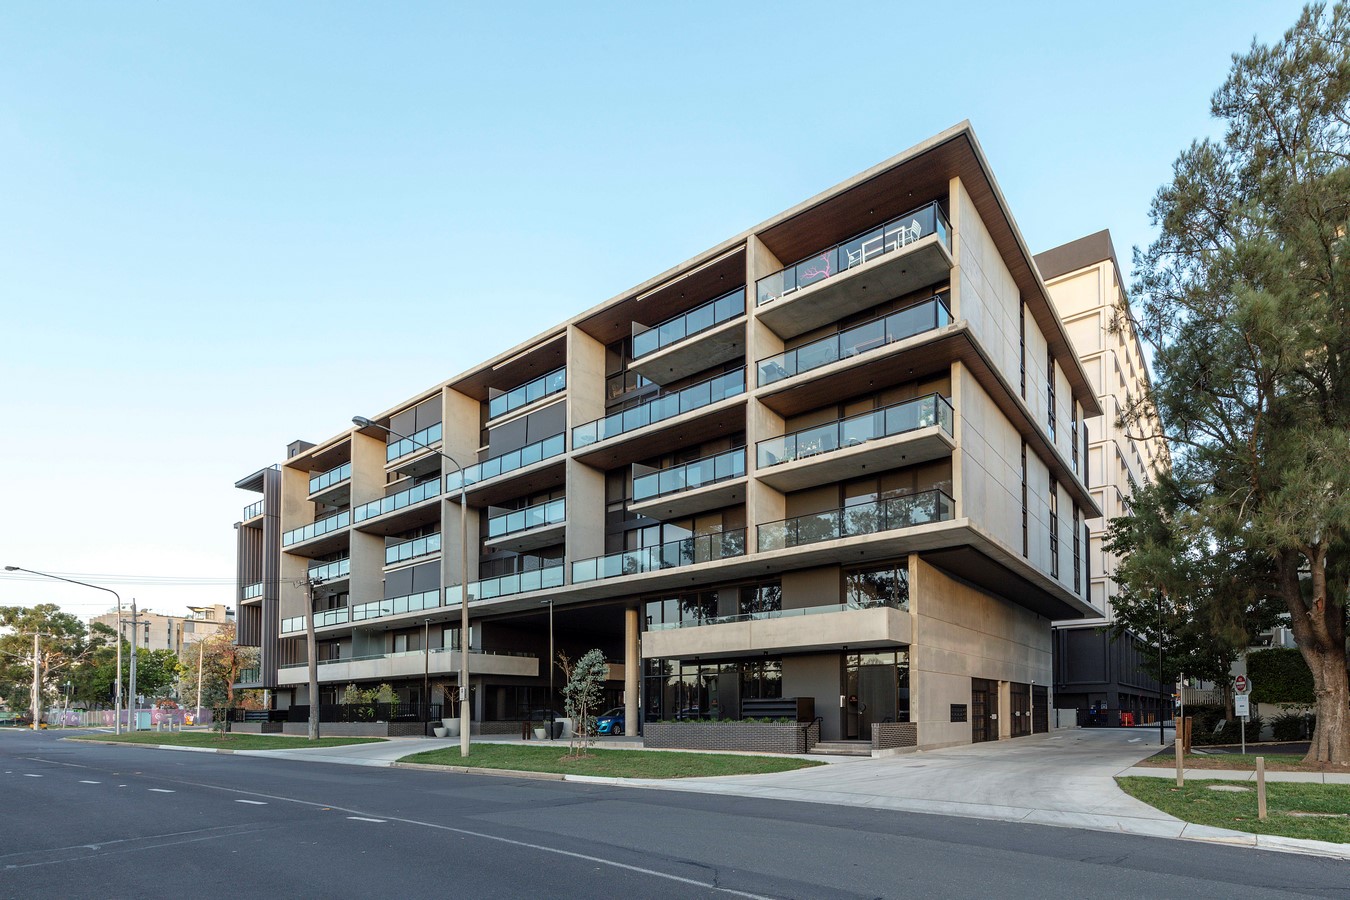 Edgeworth Apartments By Cox Architecture - Sheet2